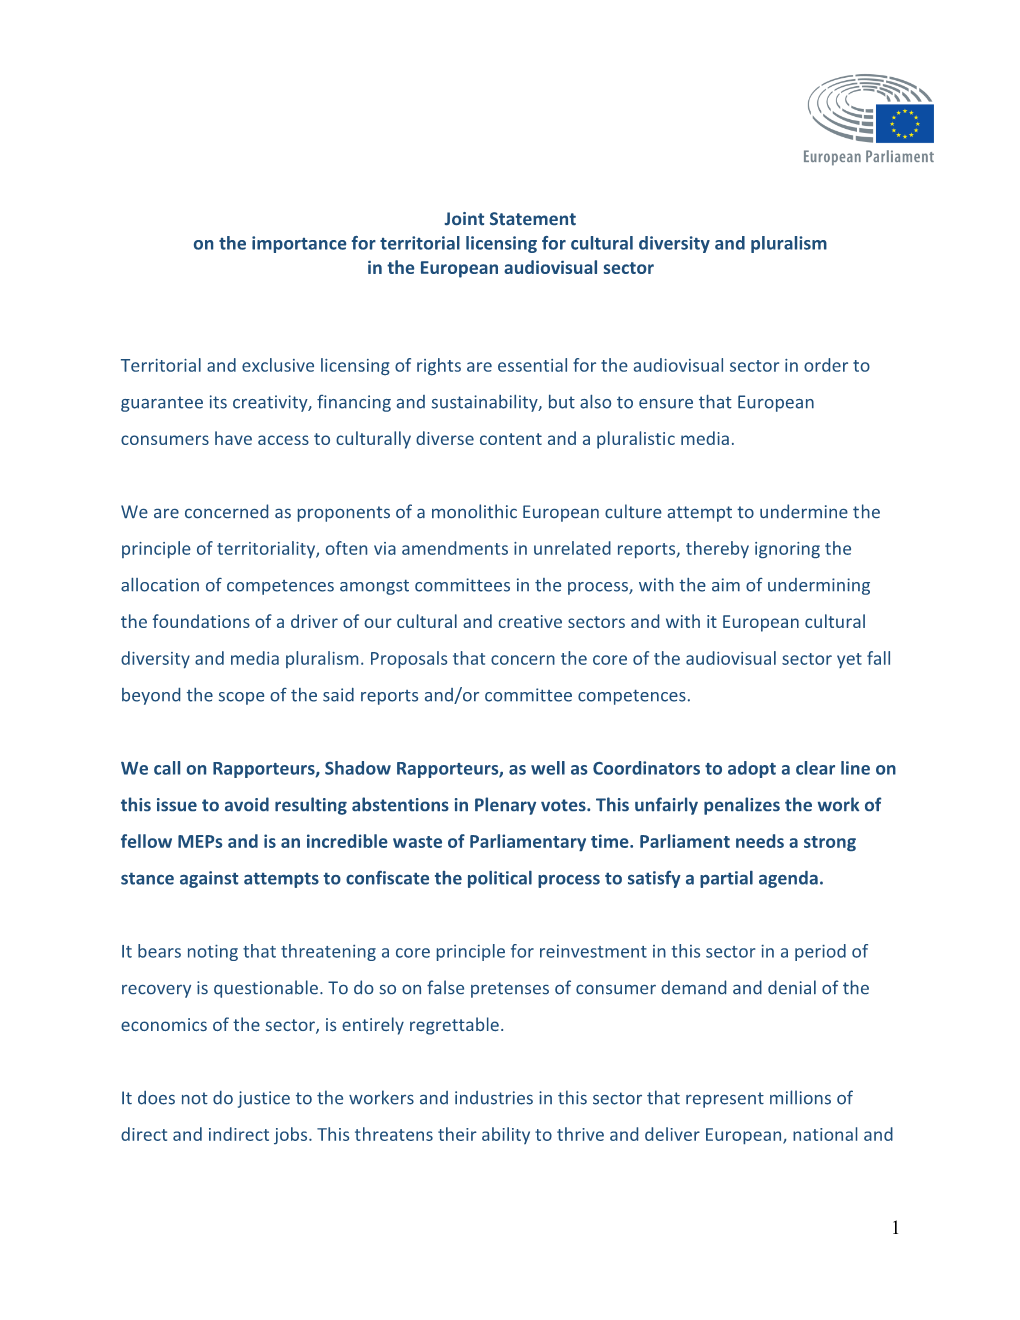 1 Joint Statement on the Importance for Territorial Licensing for Cultural Diversity and Pluralism in the European Audiovisual